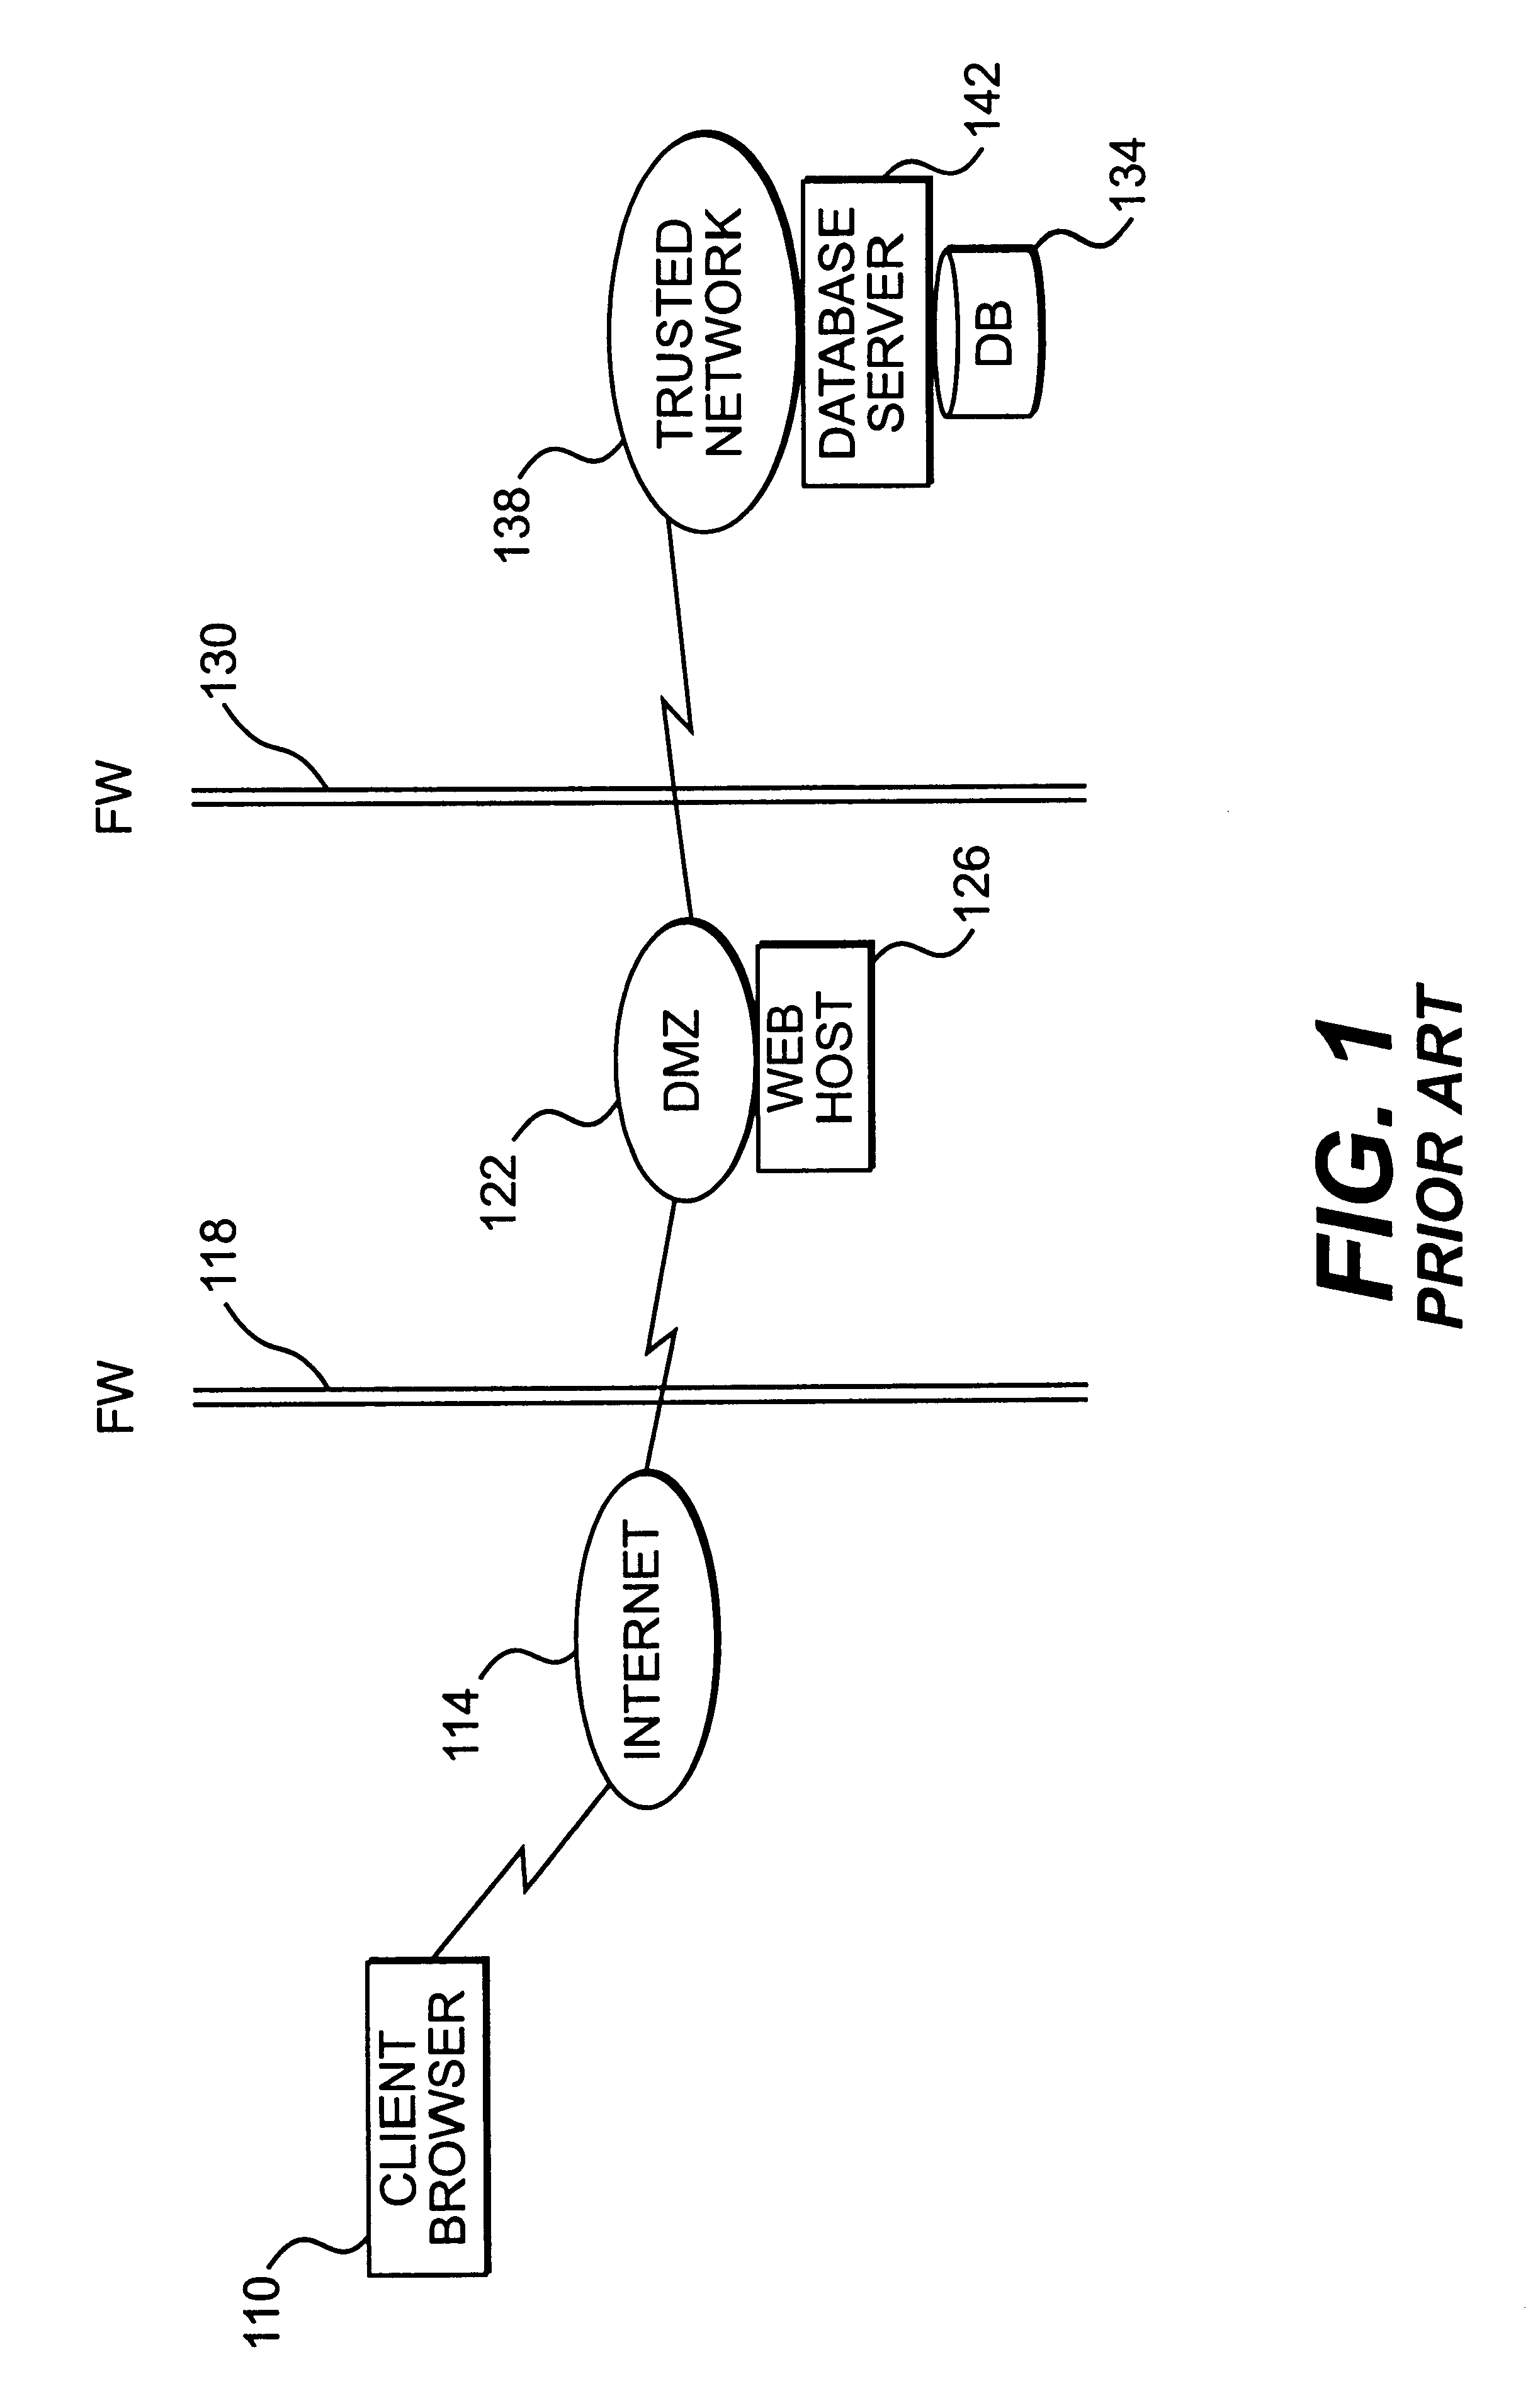 Apparatus and method for providing trusted network security